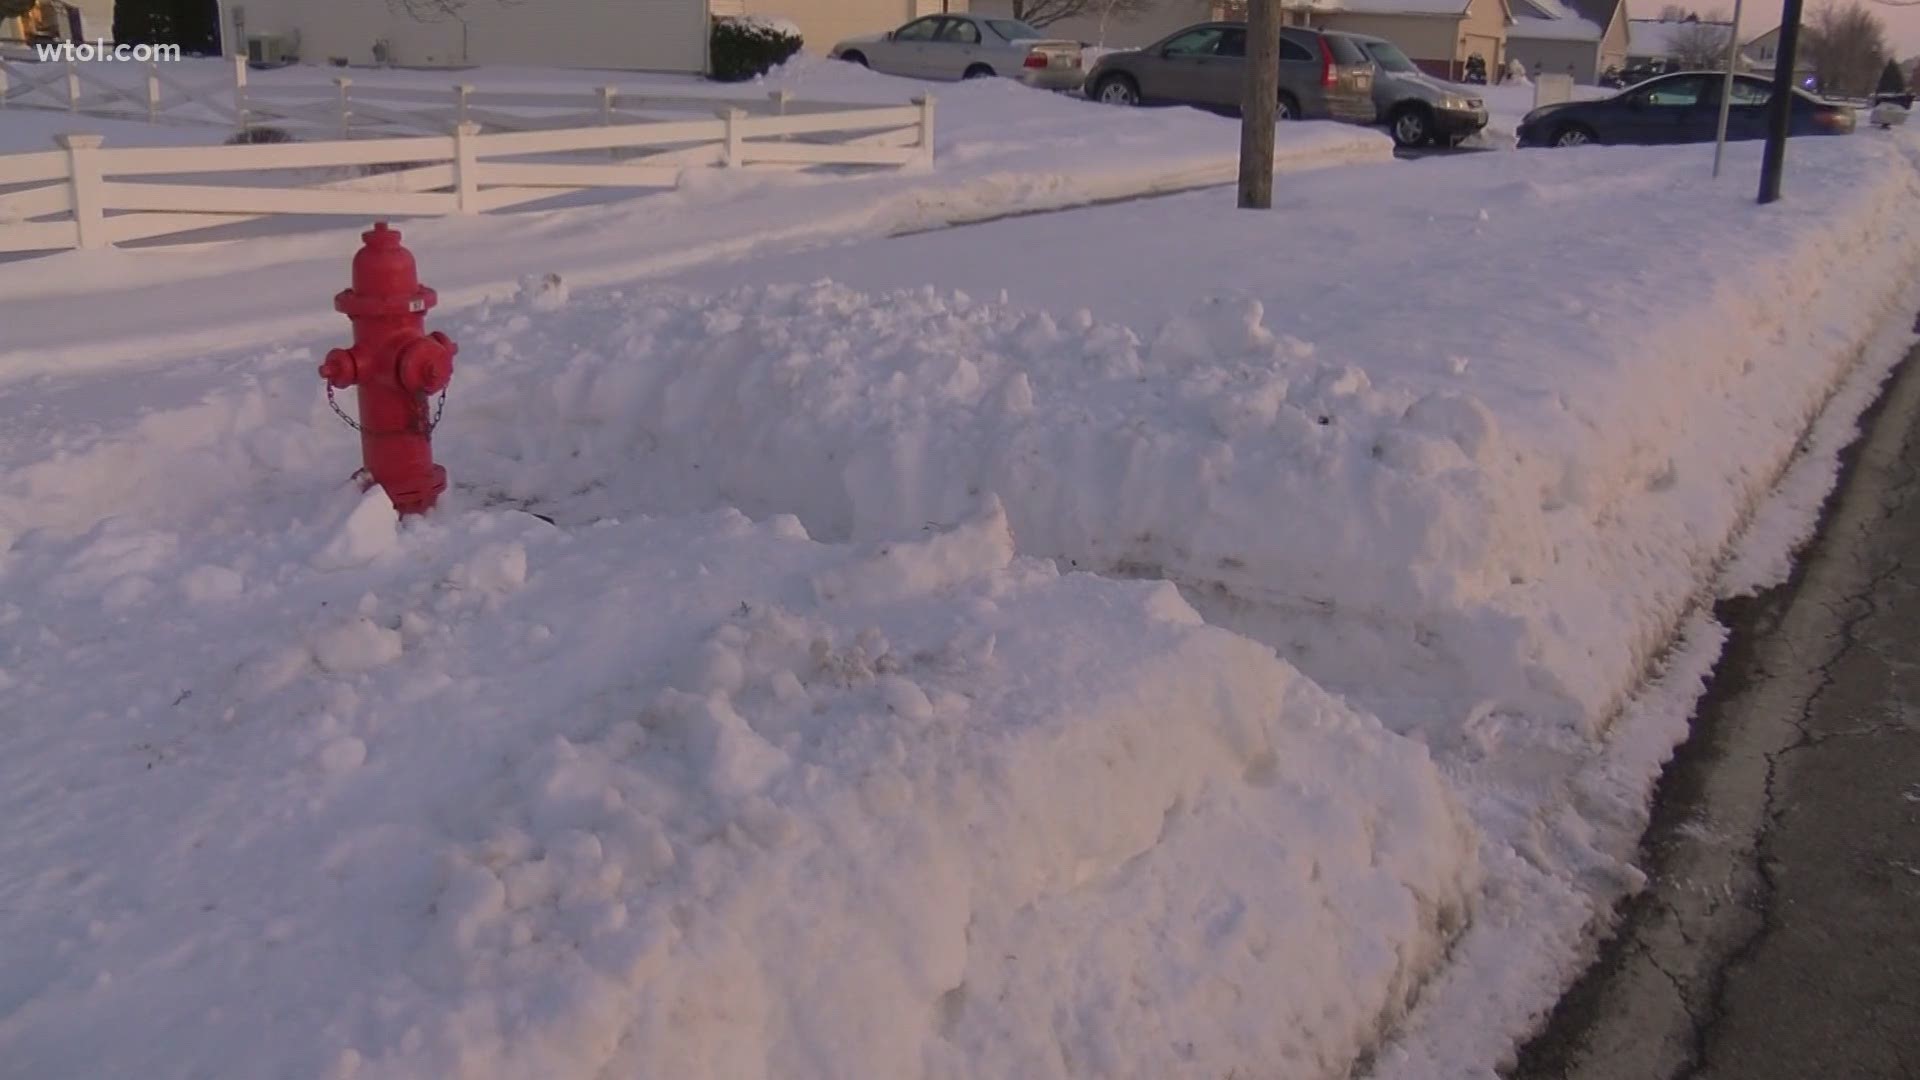 The "Dig Out Your Hydrant Challenge" was started by Whitehouse firefighter Neil Raymond on Facebook.